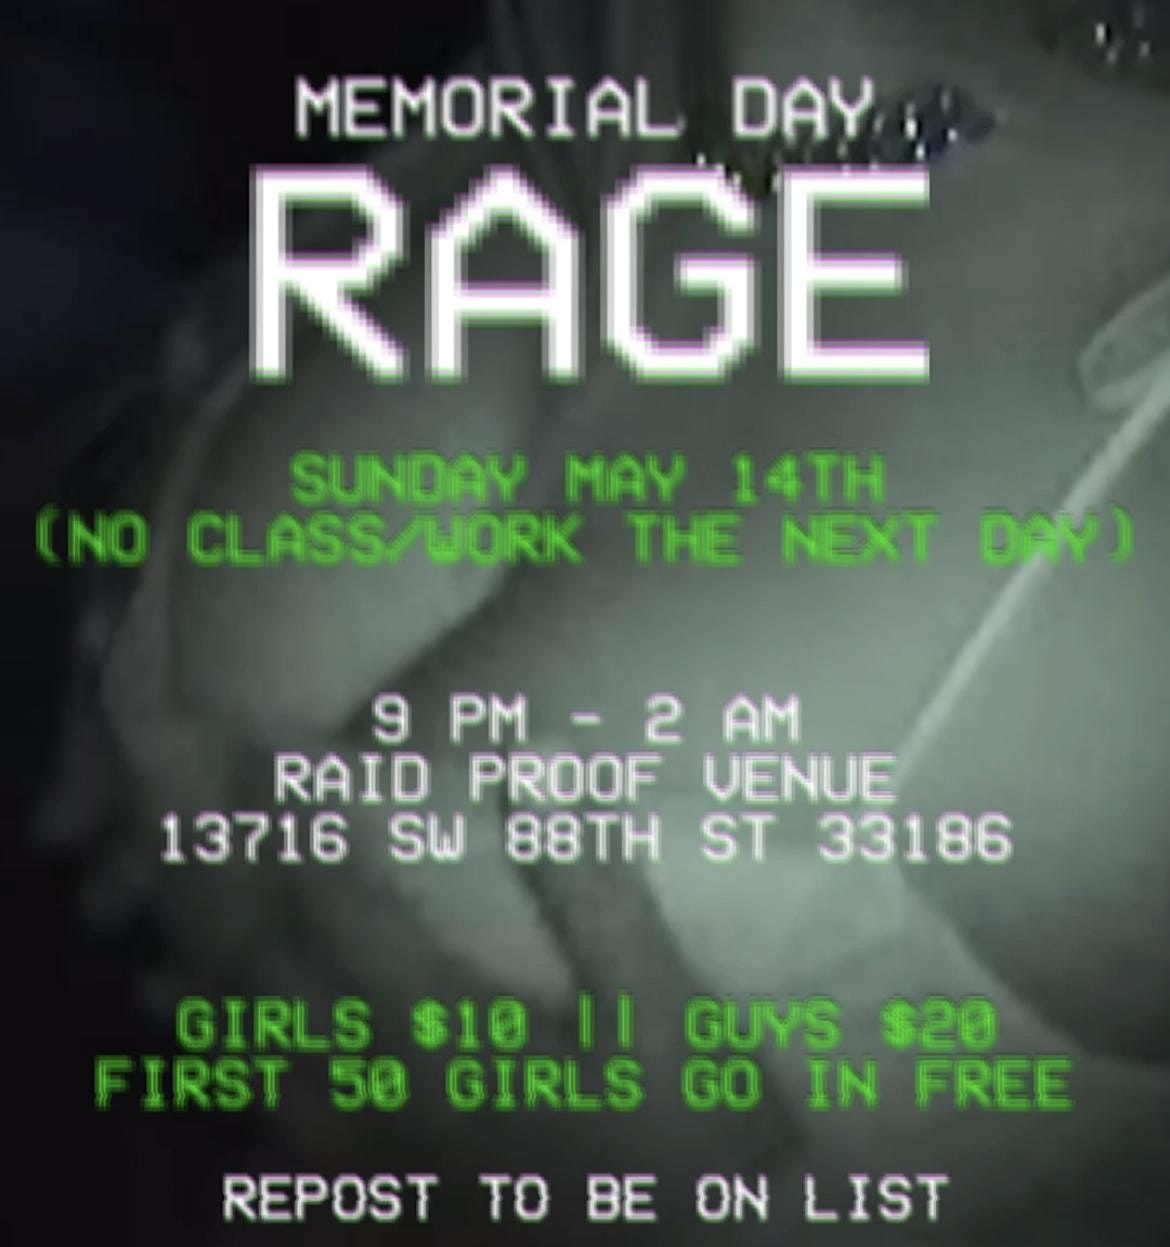 Memorial Day RAGE by party.blvd 13716 SW 88th St, Miami, FL May 14